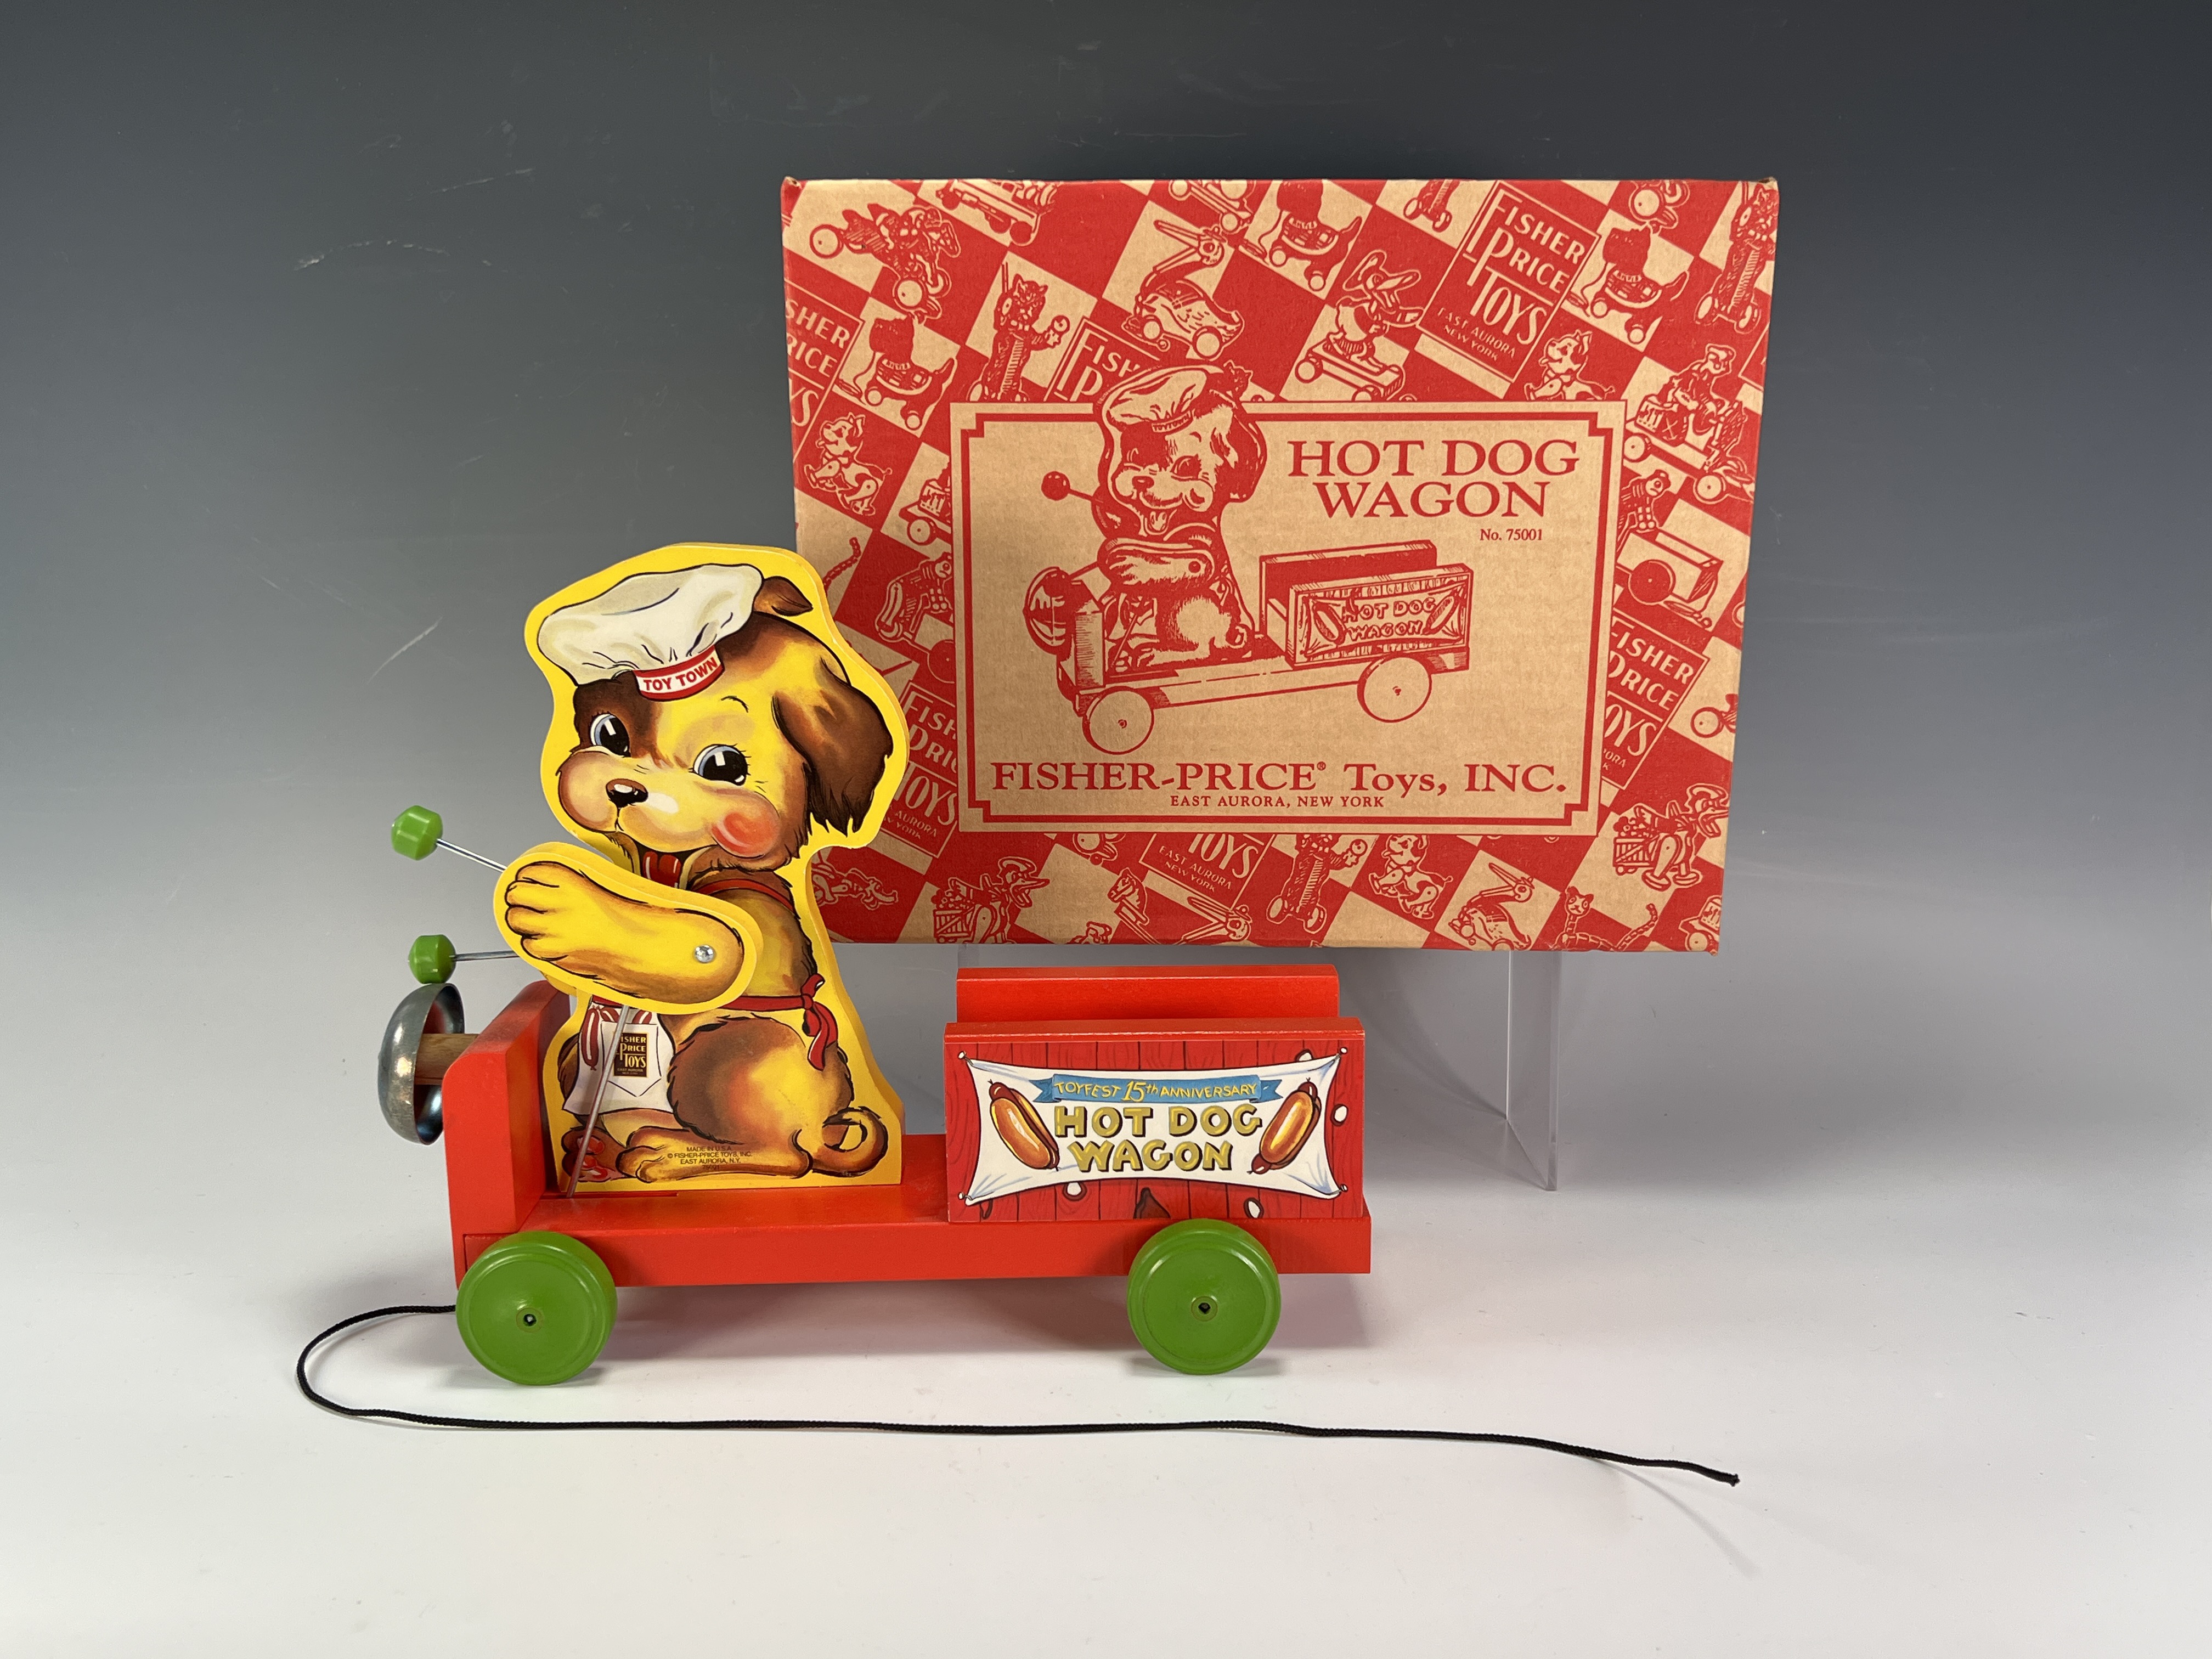 Repro Fisher Price Hot Dog Wagon Limited Edition image 1